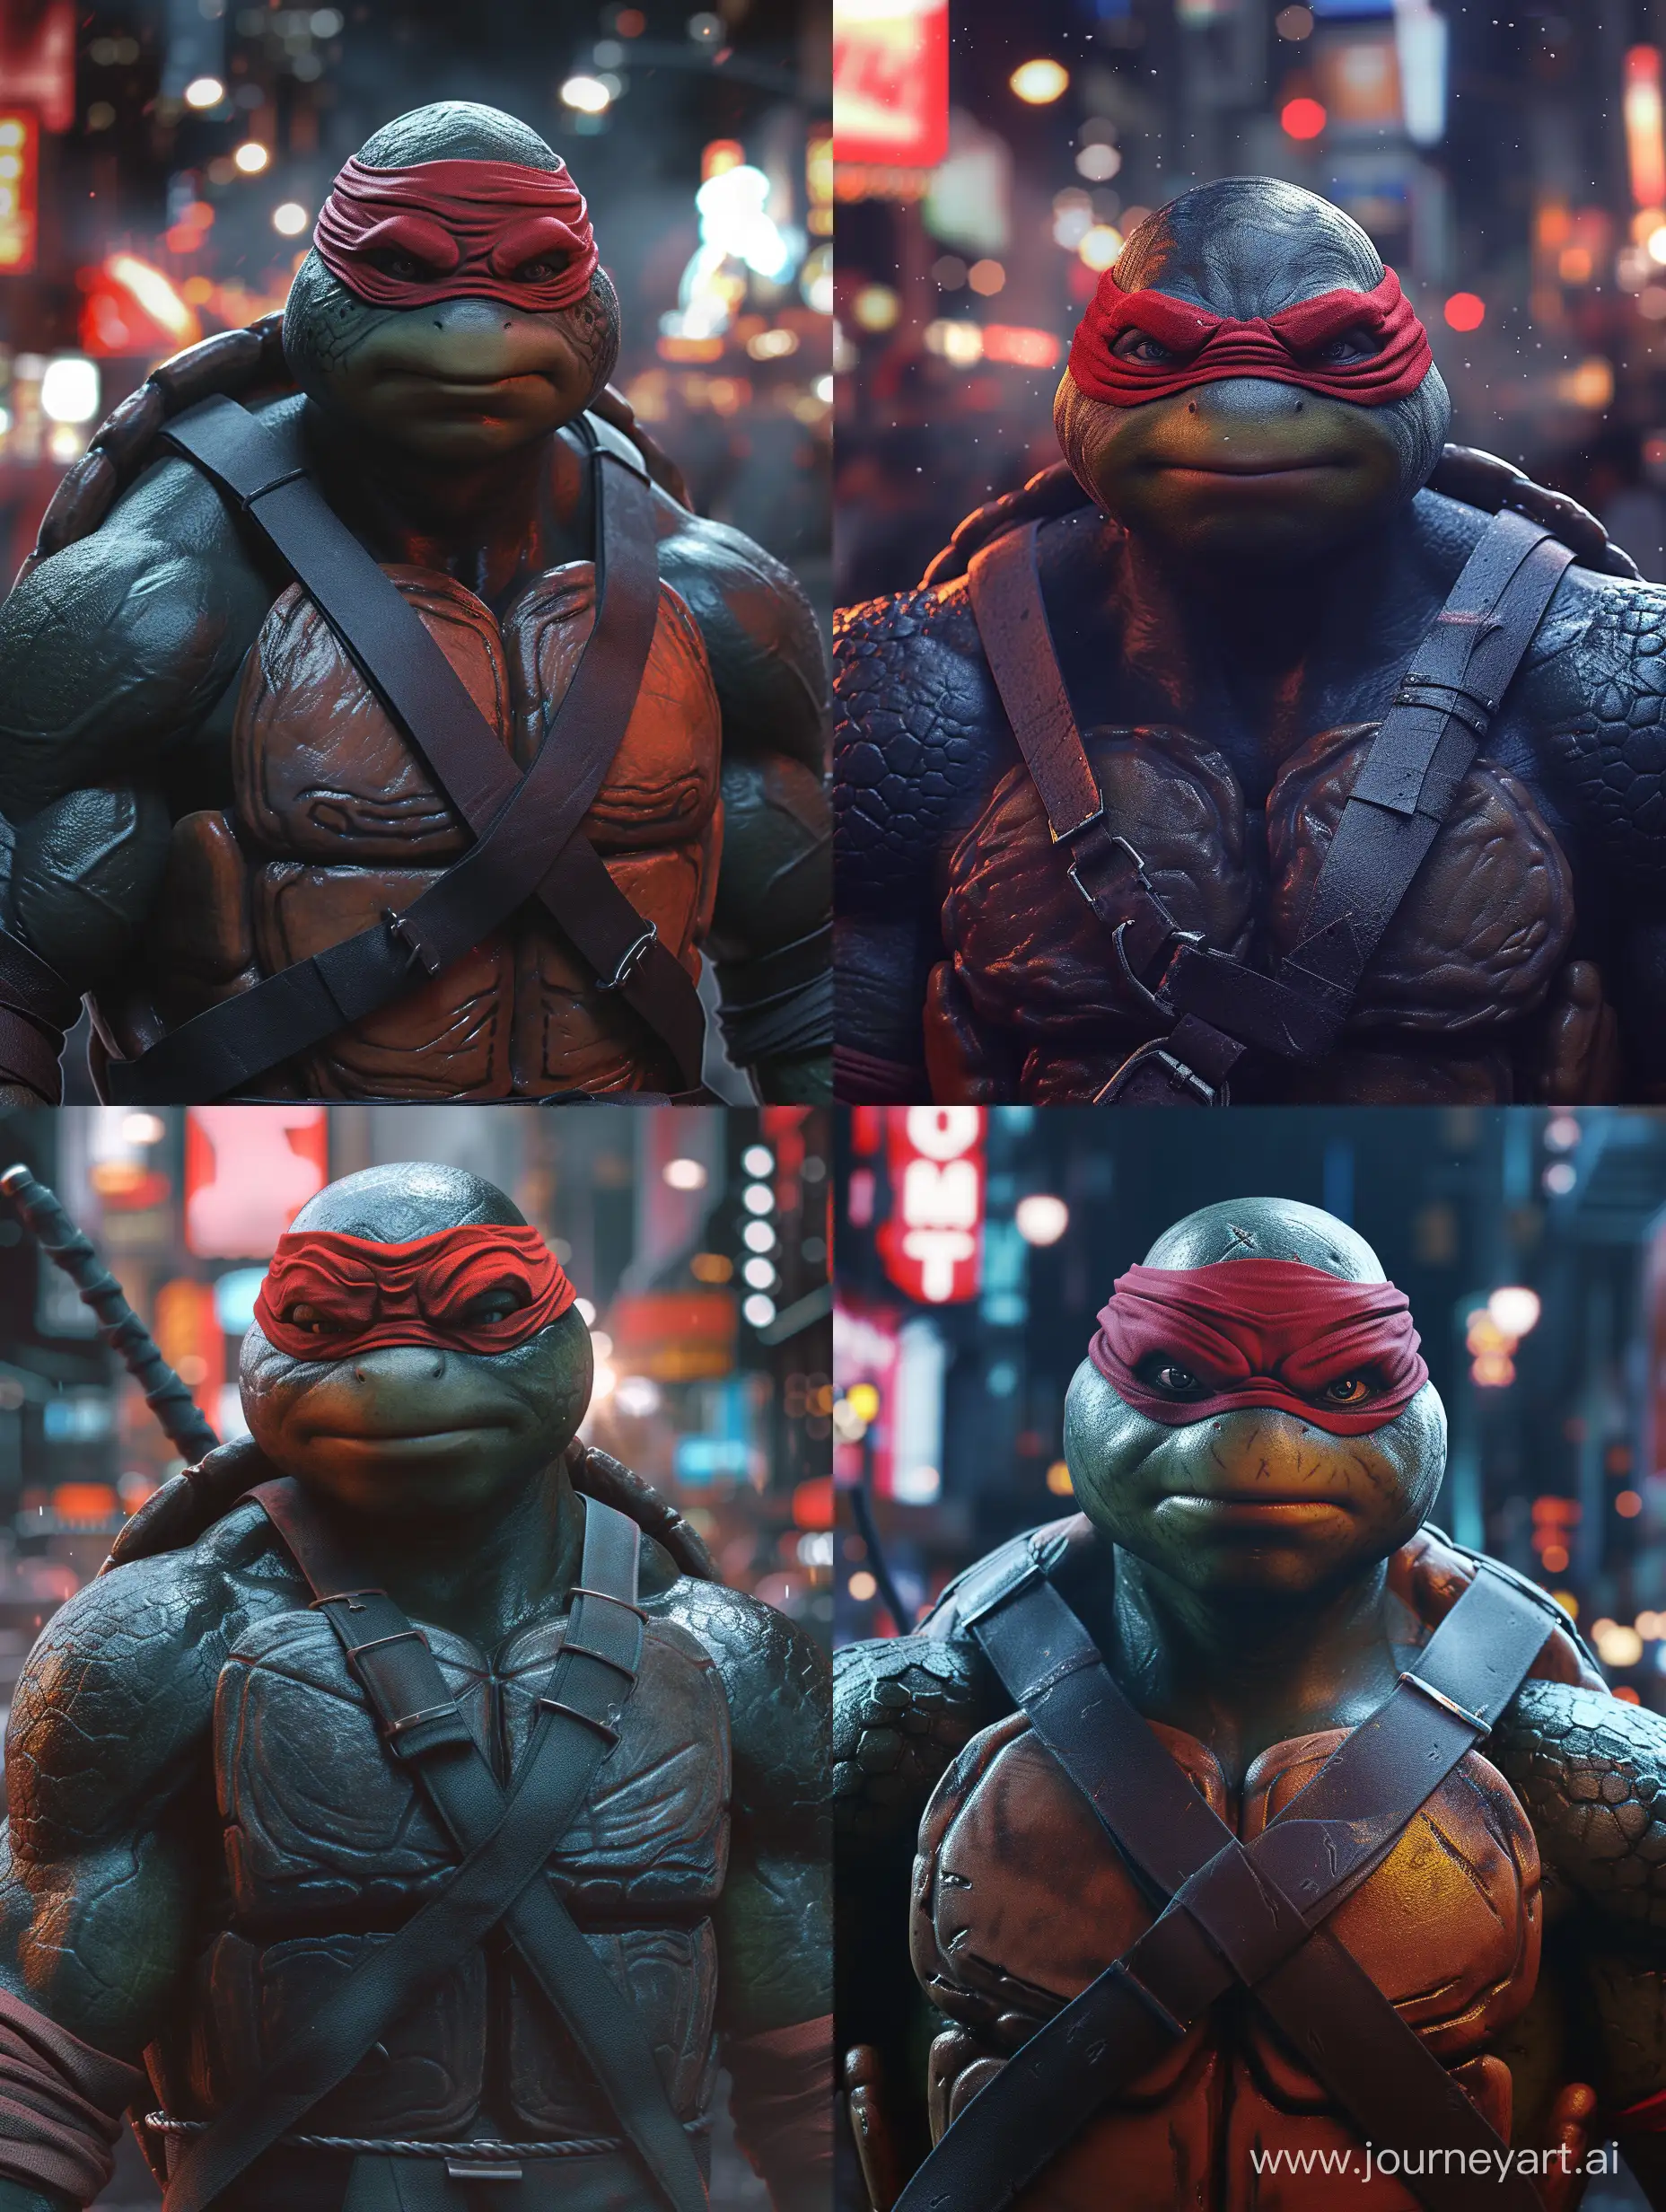 detailed and realistic   a close-up  Raphael from the Teenage Mutant Ninja Turtles.  include his confident posture, wearing a red bandana over his eyes, a serious and somewhat stern facial expression, and muscular arms. He  depicted in a dark, textured suit of armor-like plating covering his chest and shoulders, with various straps and belts across his torso. The background a blurry, bustling urban night scene, possibly suggesting a city like New York, with dim and atmospheric lighting and neon lights glowing in the distance. high-quality, high-resolution, and lifelike appearance of the image, emphasizing the attention to texture and lighting that enhances the character's realism 